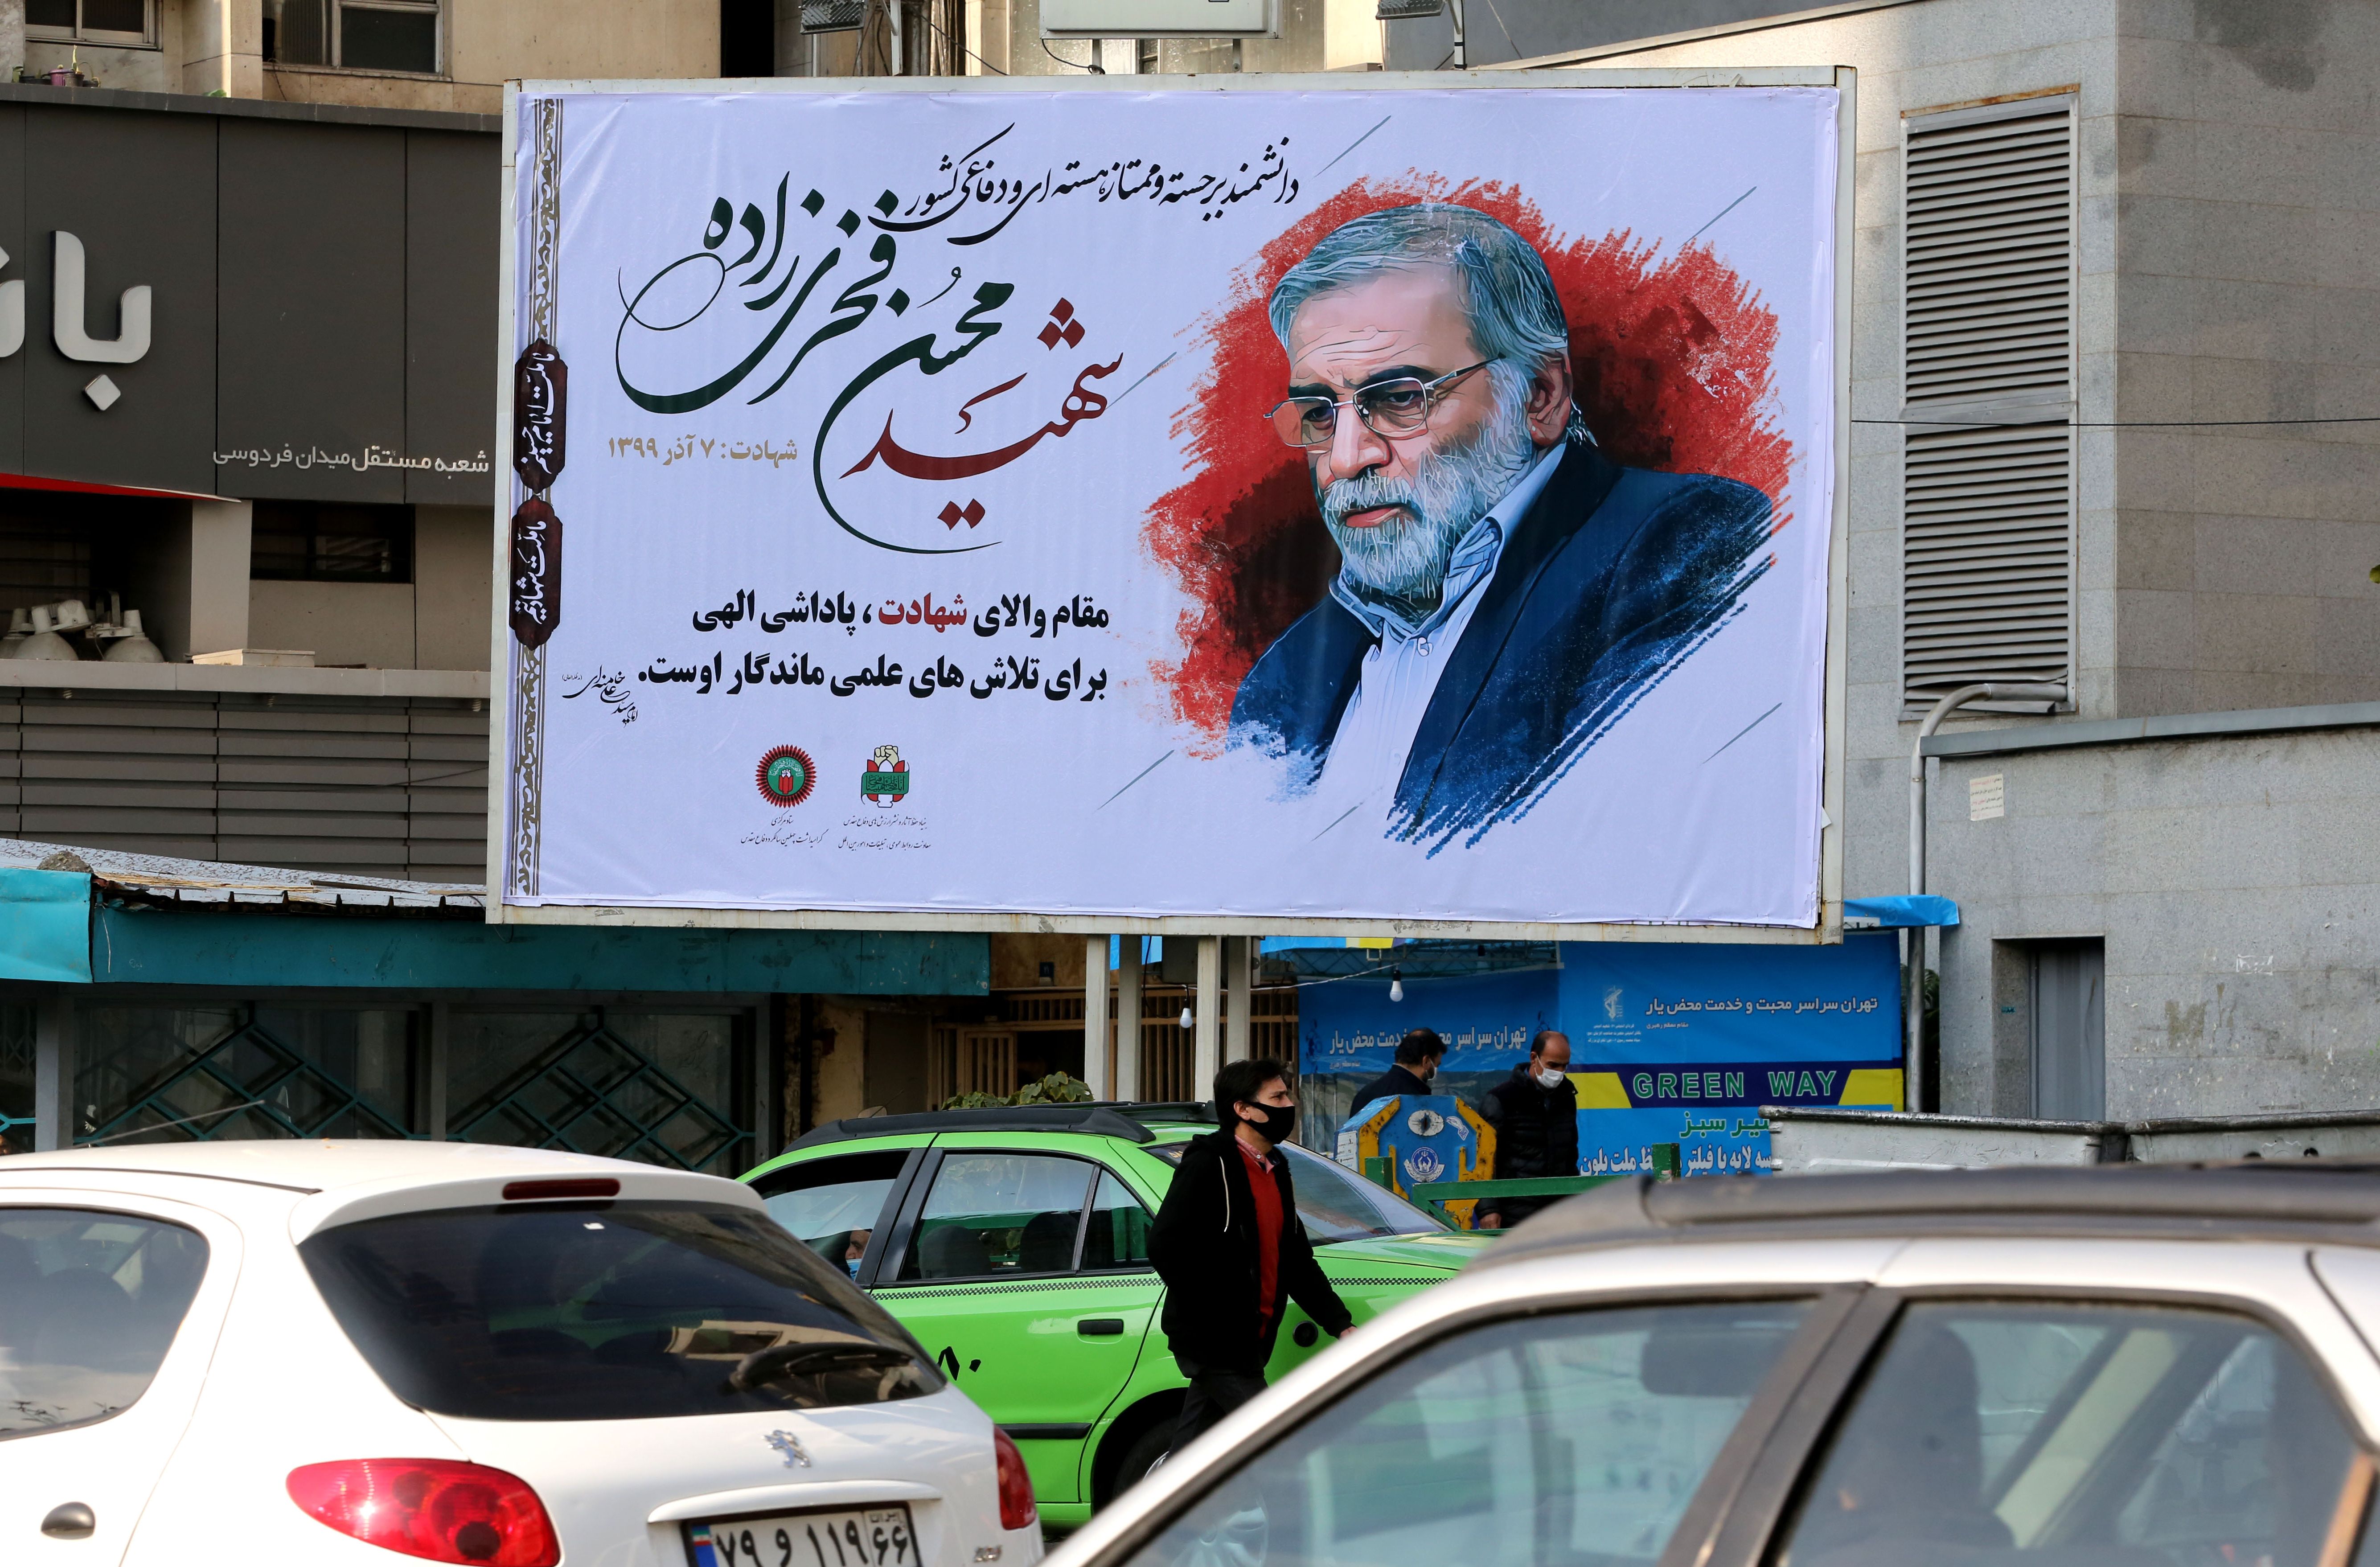 Vehicles drive by a billboard in honour of slain nuclear scientist Mohsen Fakhrizadeh in the Iranian capital Tehran, on November 30, 2020. - Iran laid to rest a nuclear scientist in a funeral